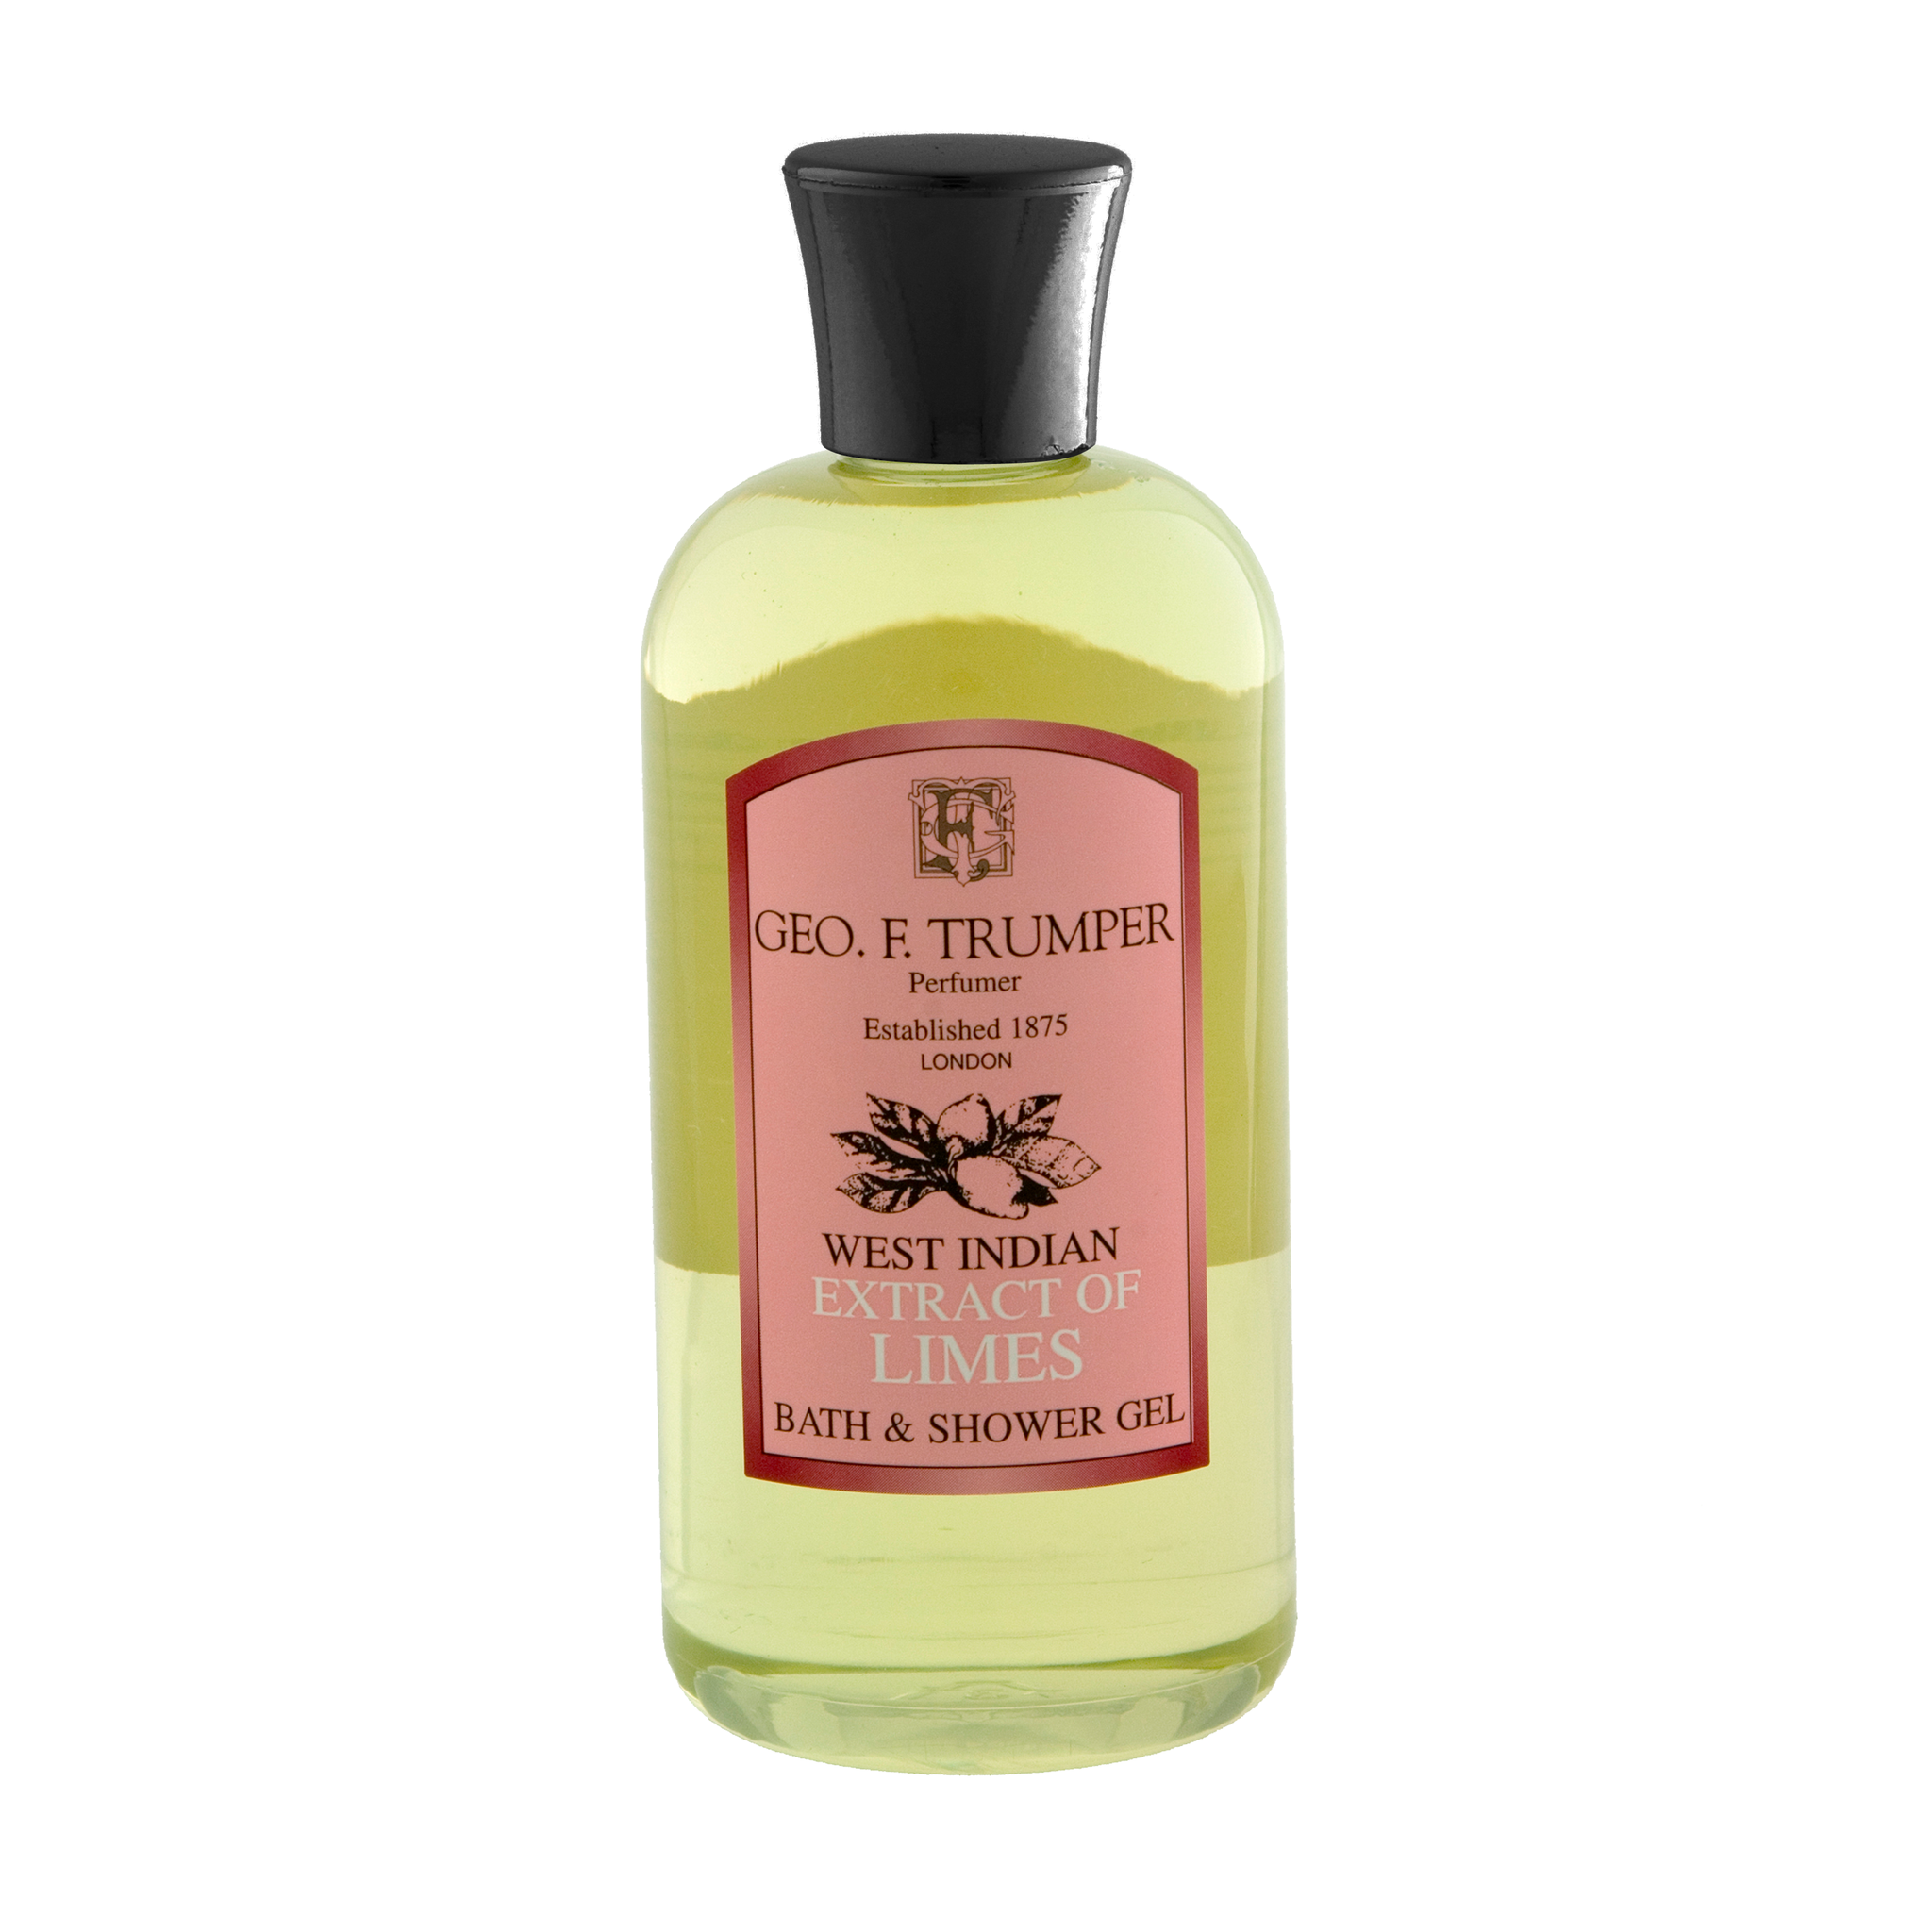 Geo F Trumper Extract of Limes Bath and Shower Gel 200ml